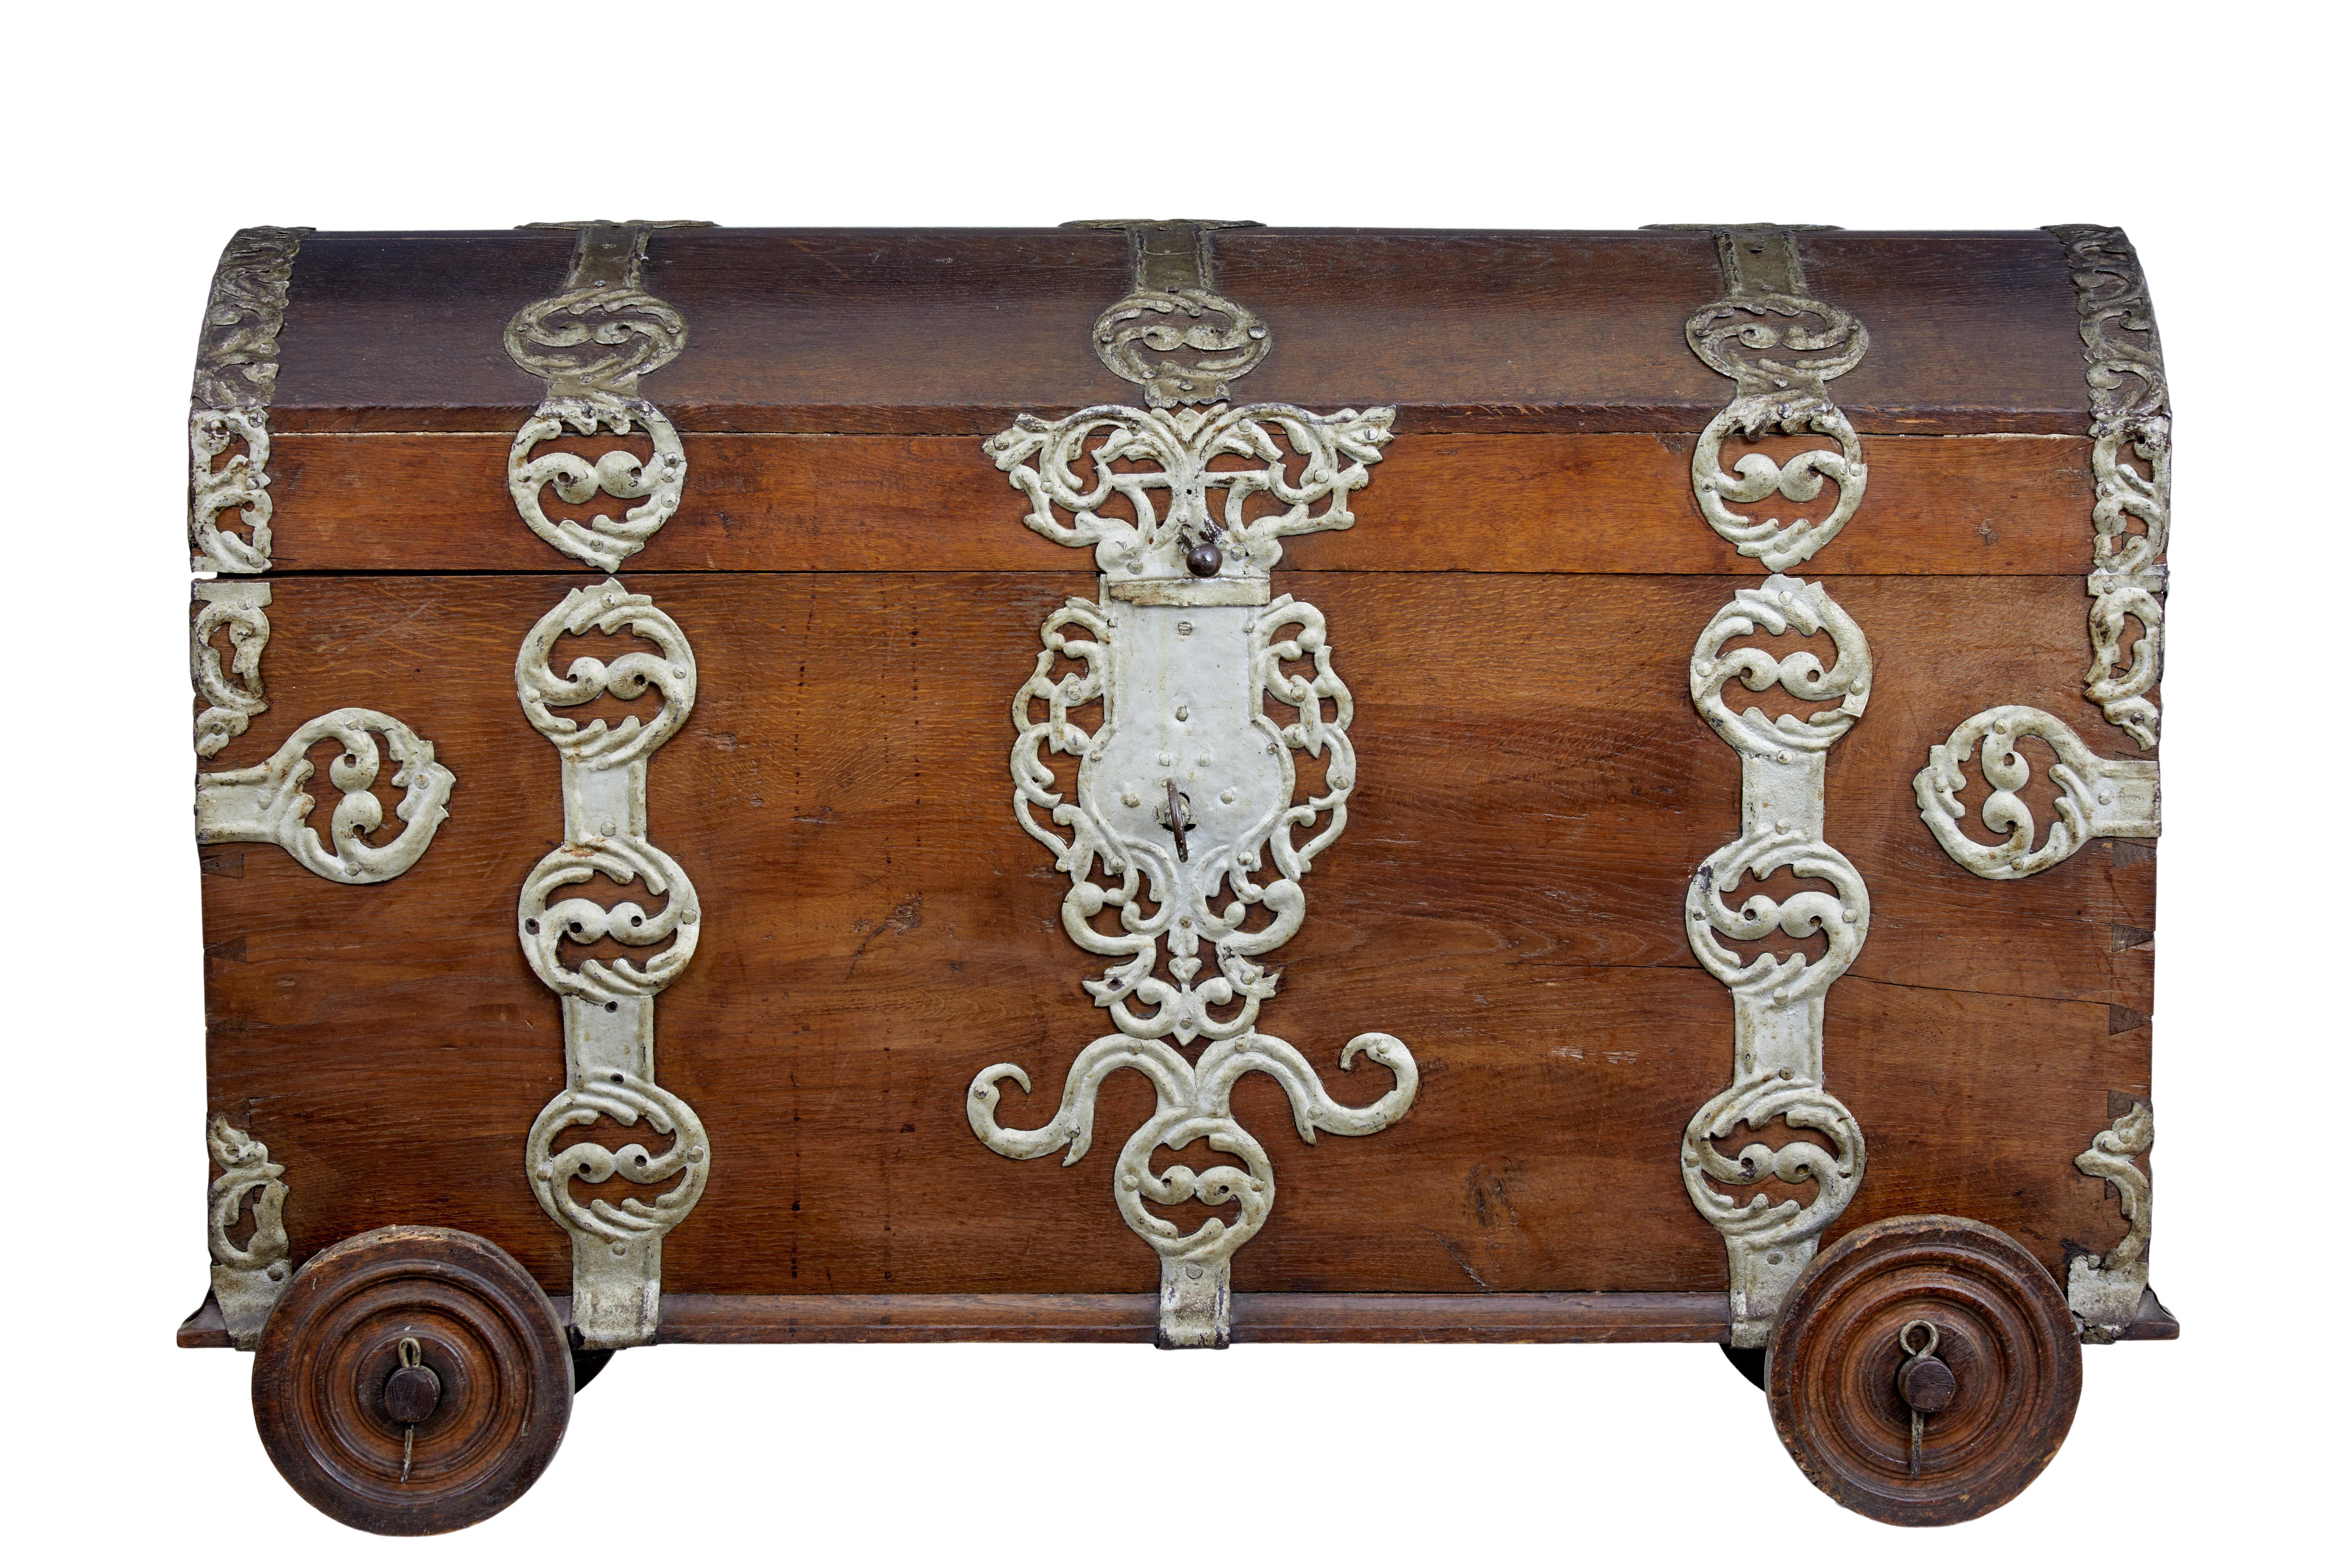 Baroque Revival 18th Century Oak and Metal Bound Trunk on Wheels